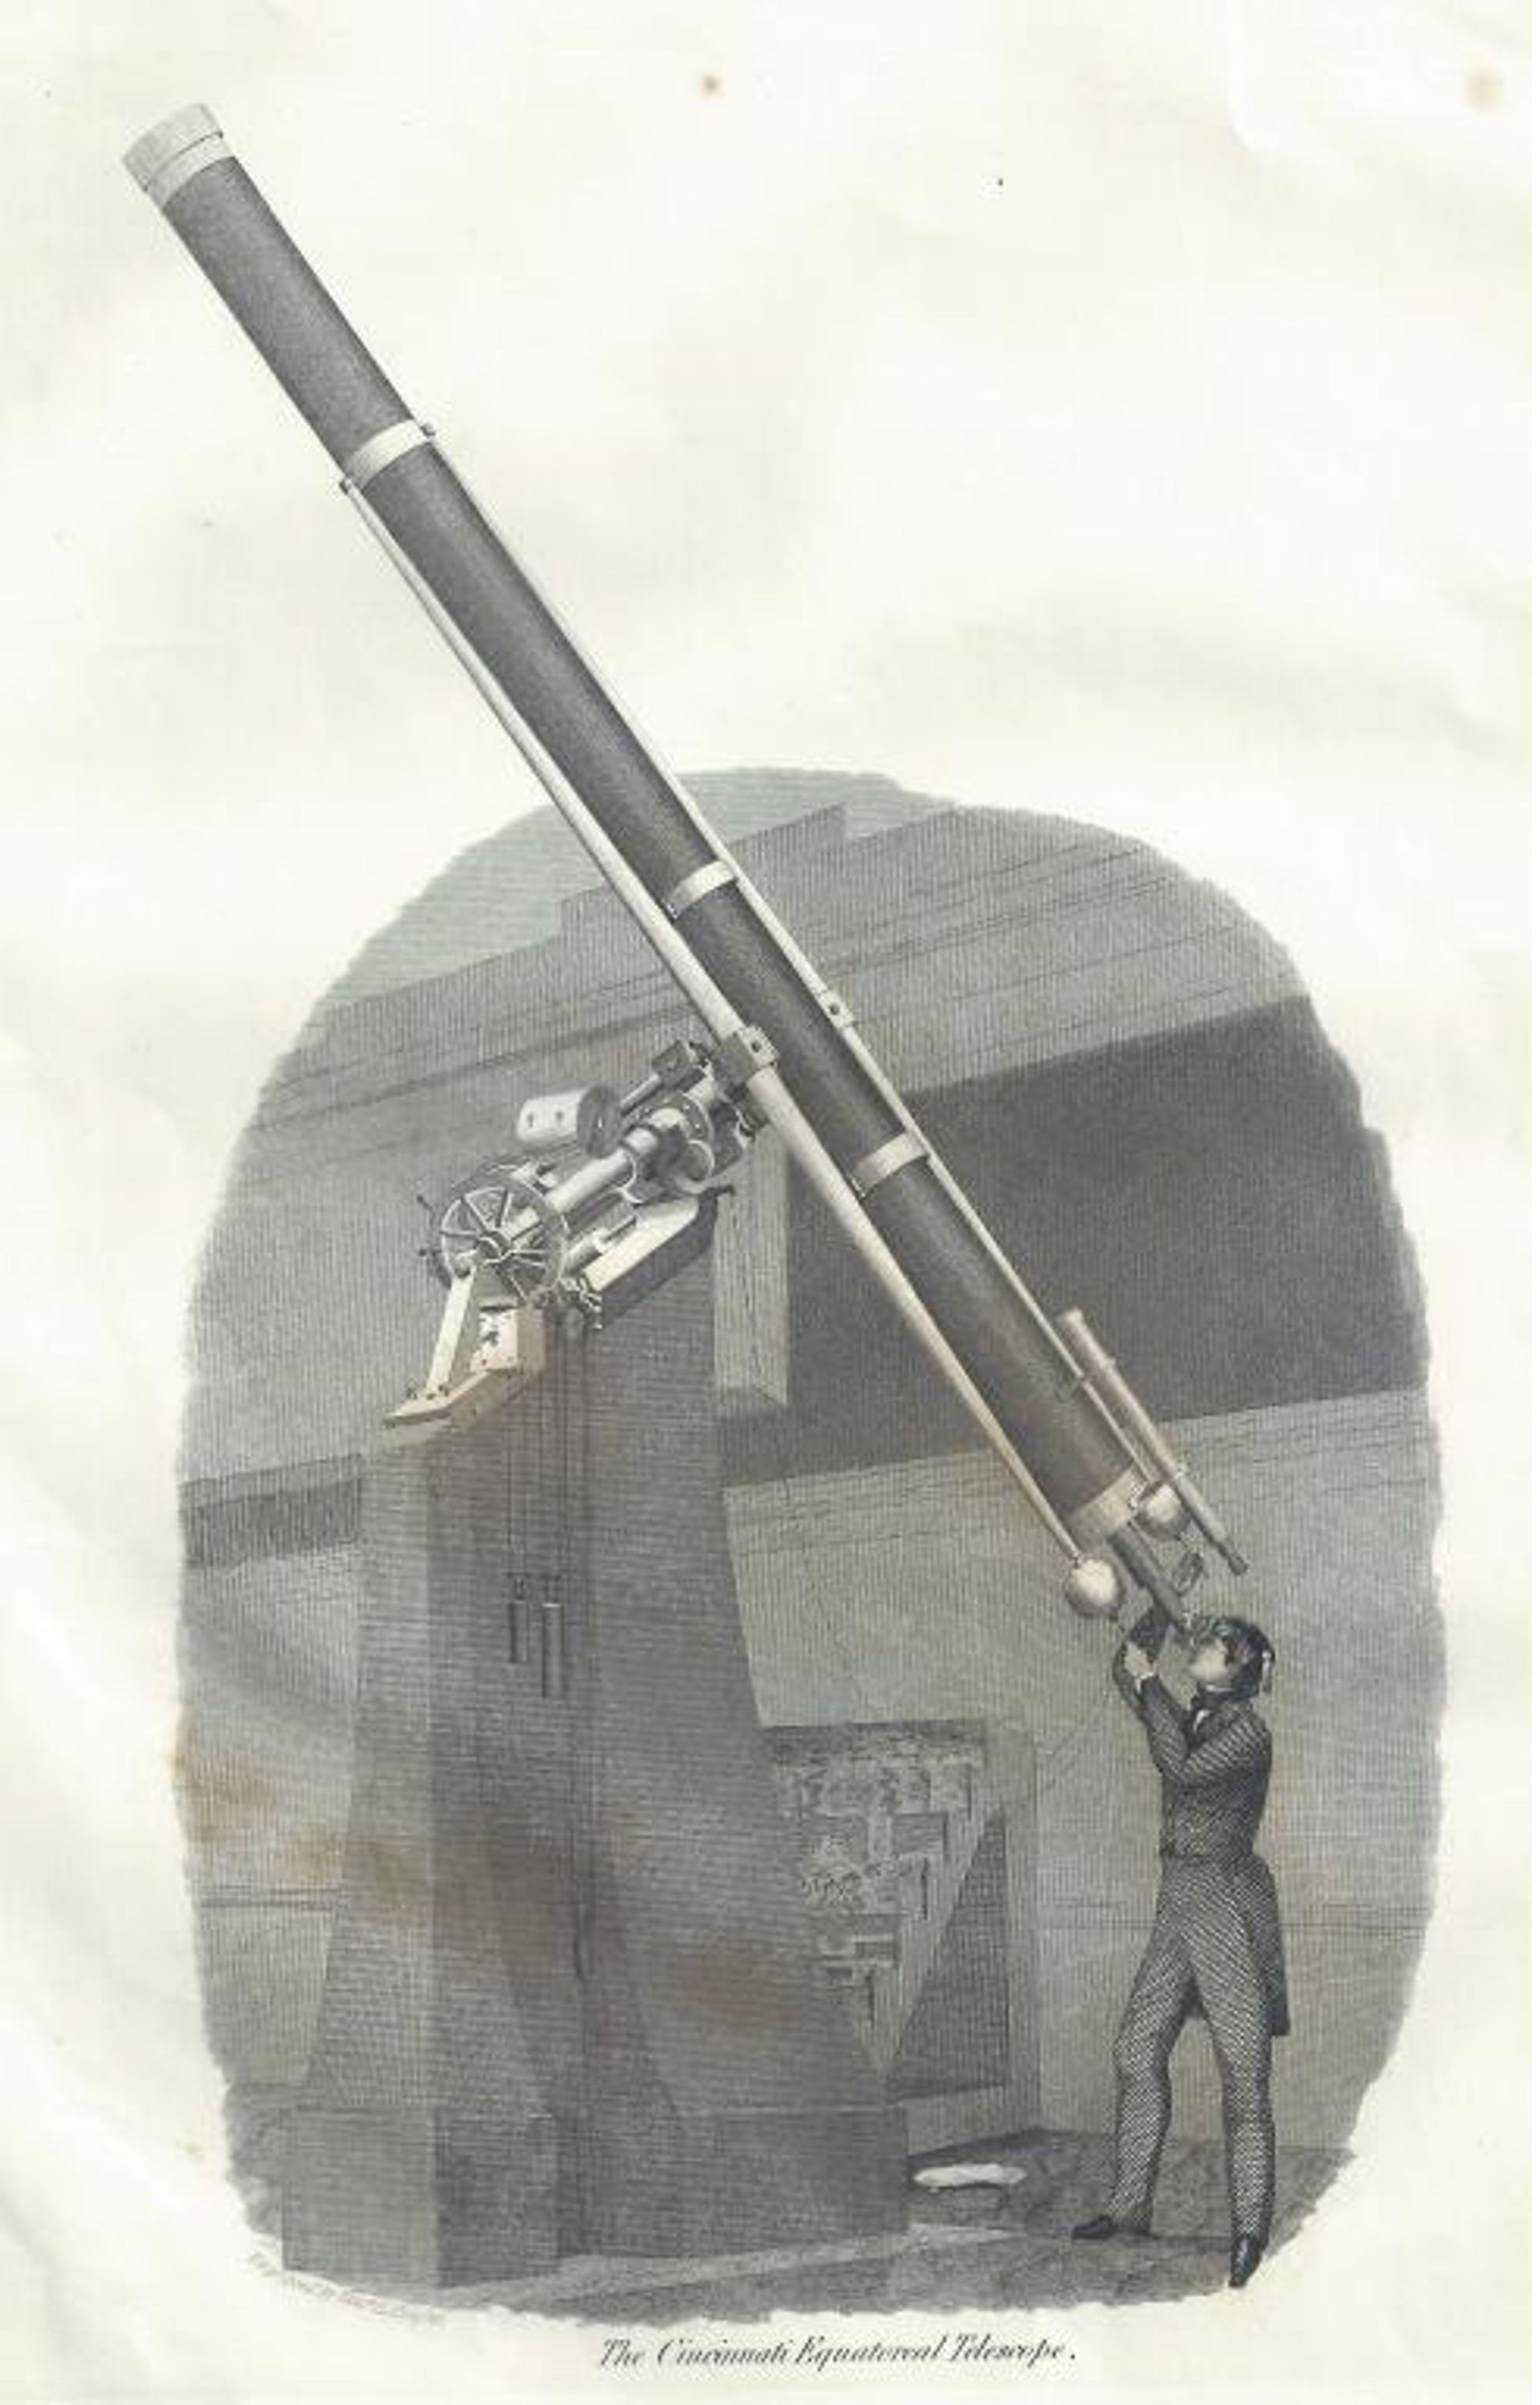 An old etching of a figure gazing into a large telescope, whose optical tube extends beyond the frame.